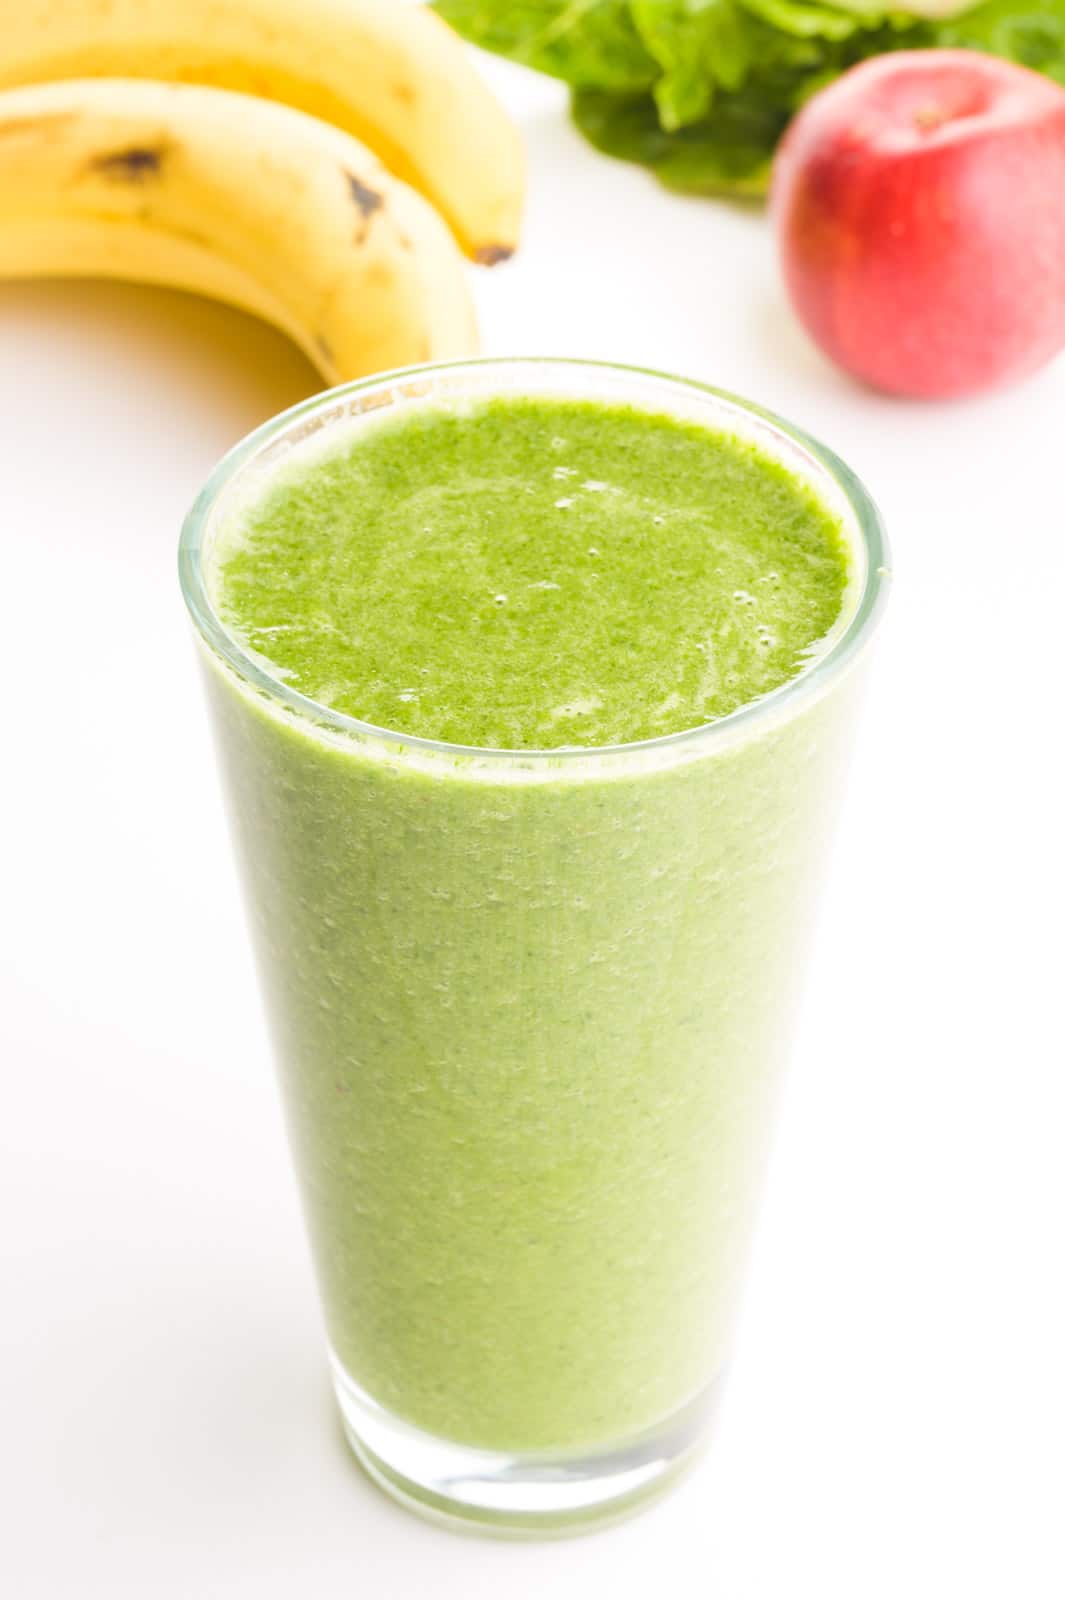 A glass if full of green smoothie. There's bananas, an apple, and greens in the background.